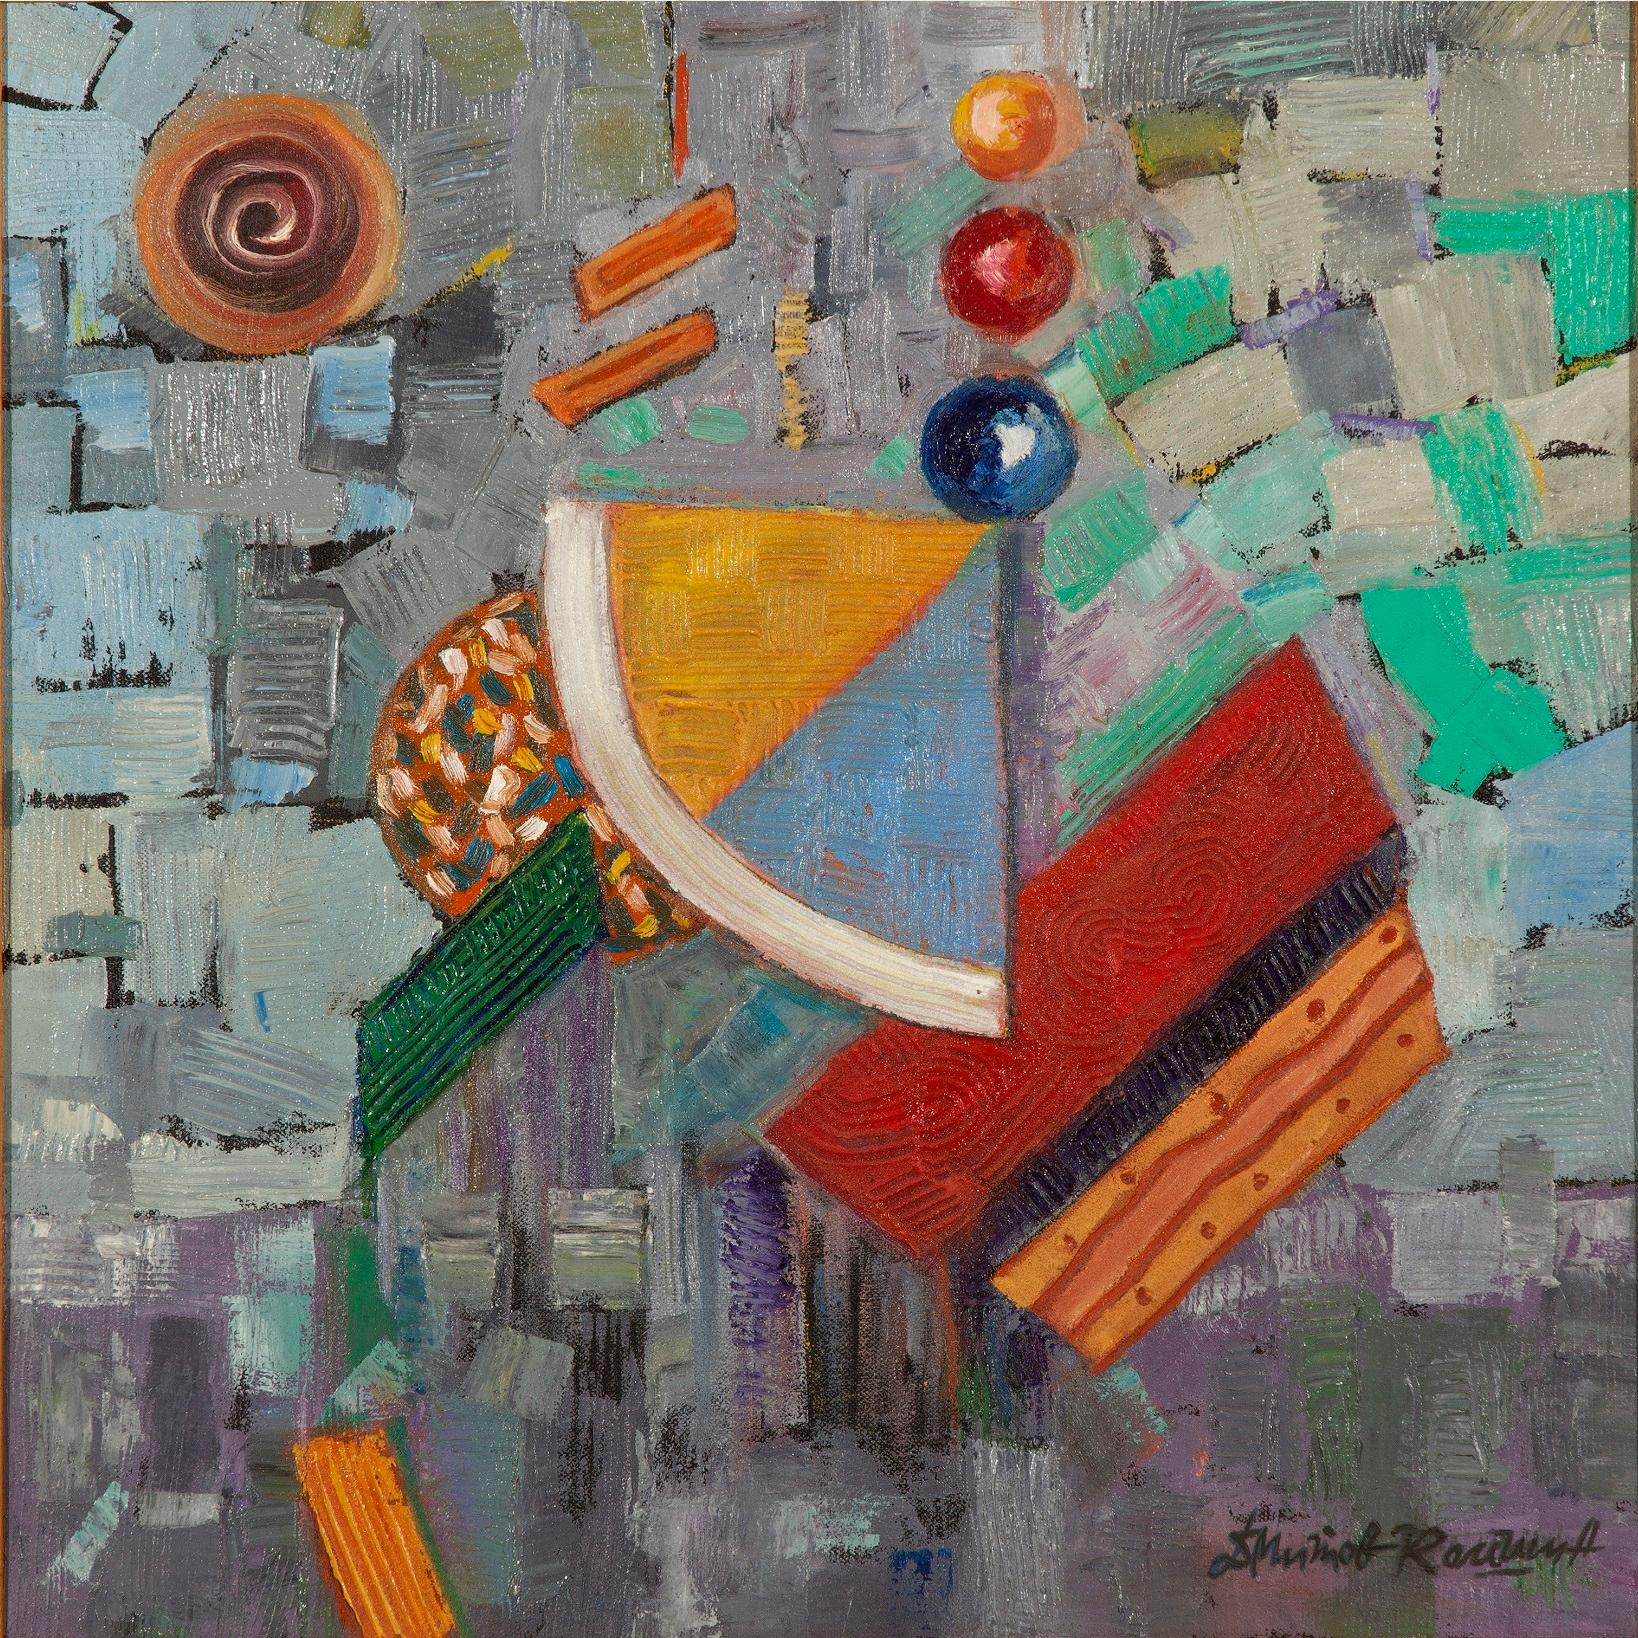 Dimitar Mitov - Komshin  Abstract Painting - Composition With Balls - Abstract Oil Painting Blue Green Brown White Red Orange